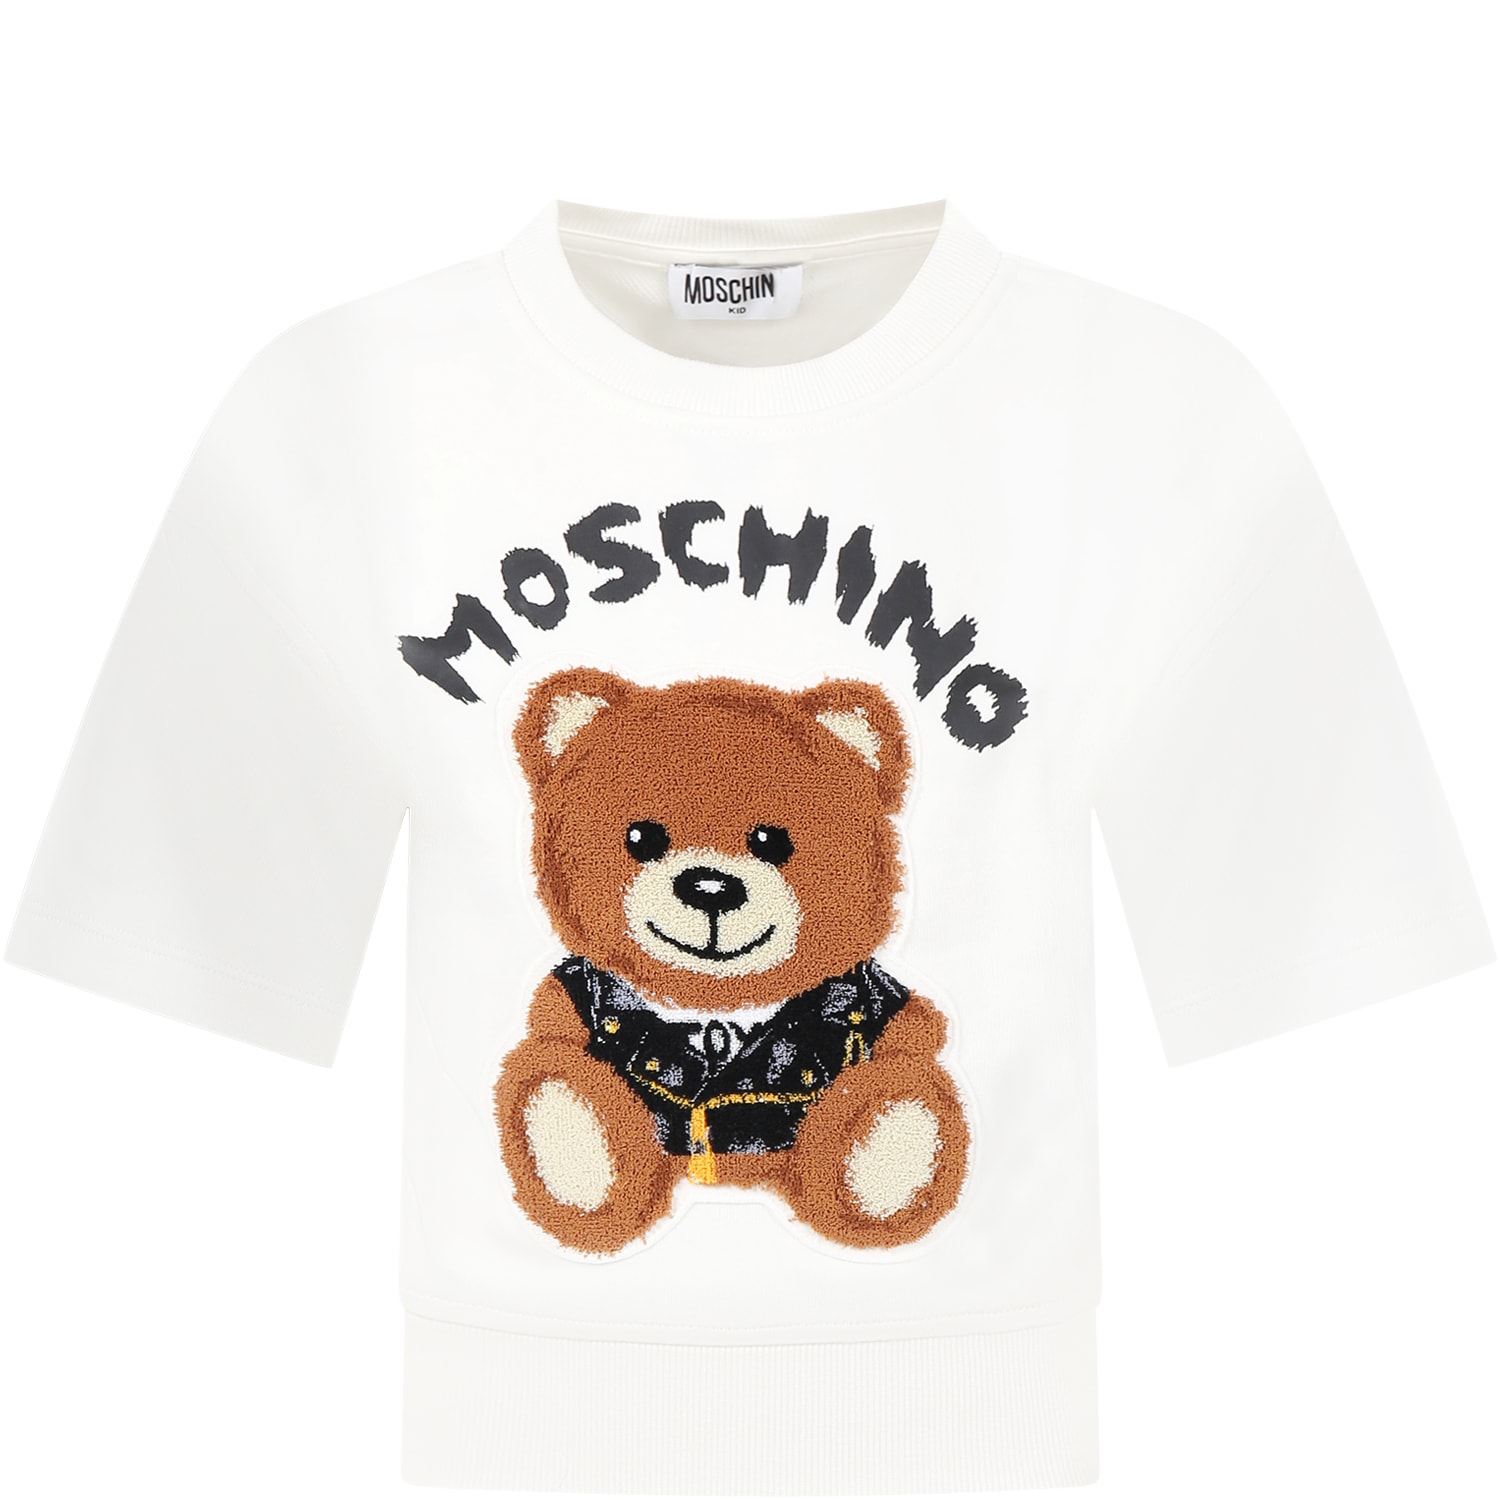 Moschino White Sweatshirt For Kids With Teddy Bear And Logo